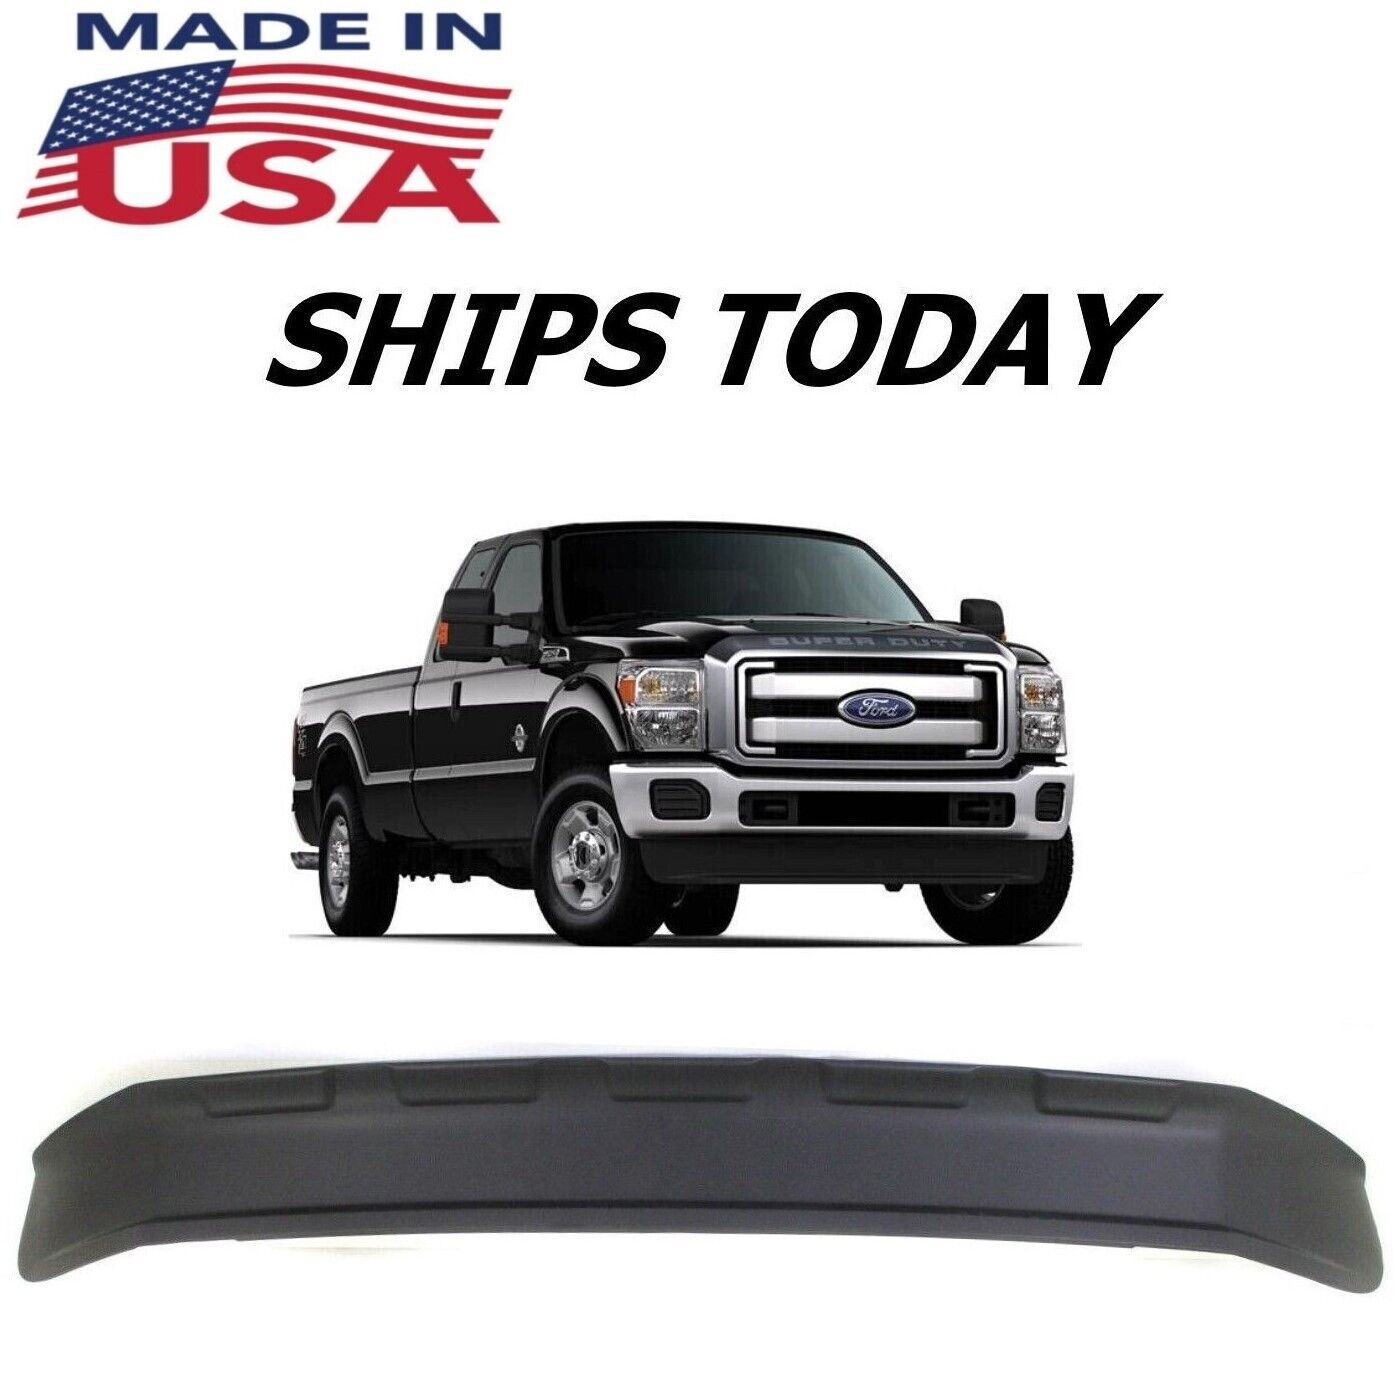 NEW USA MADE Front Lower Valance For 2011-2016 Ford F-250 F-350 F-450 F-550 4WD